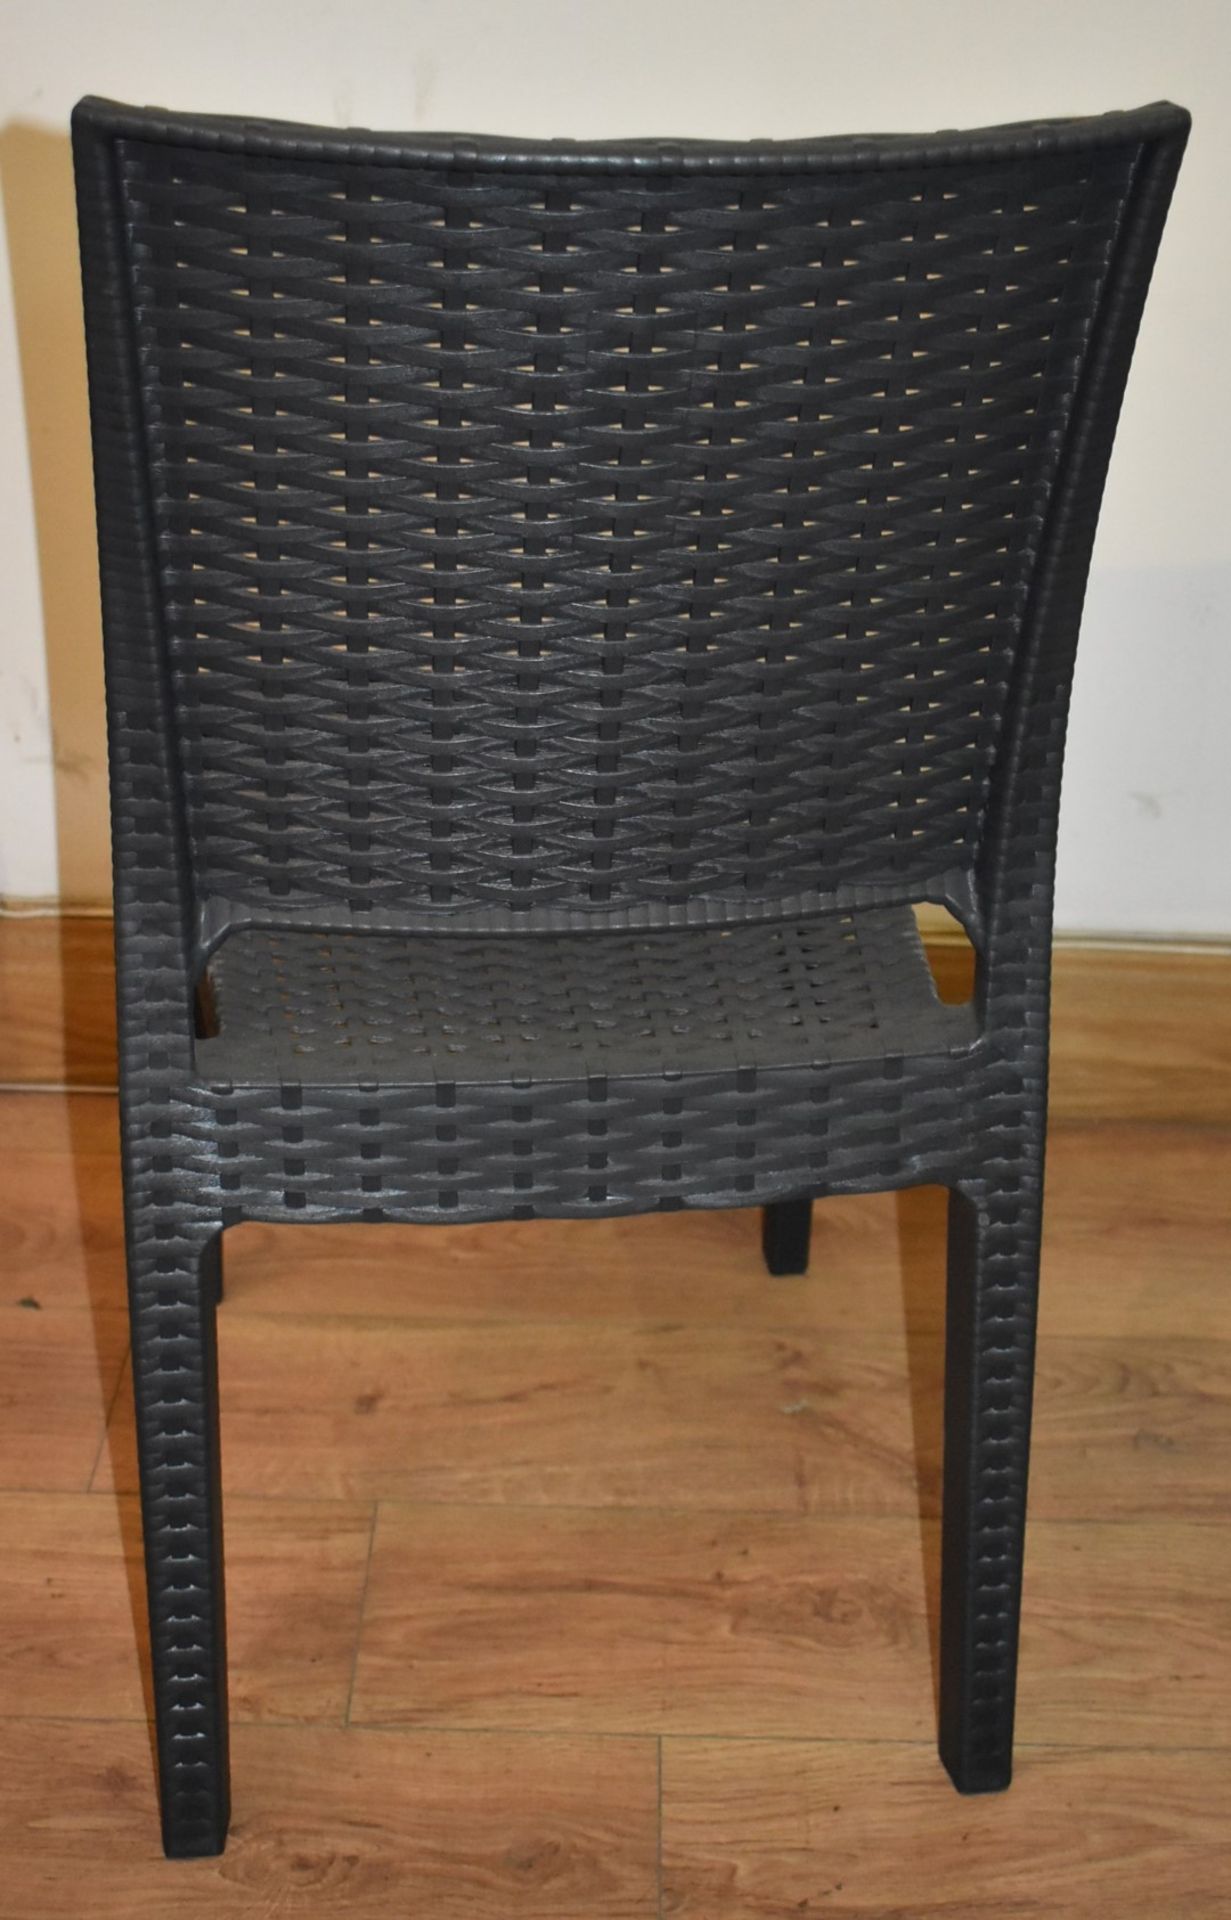 8 x Siesta 'Florida' Rattan Style Garden Chairs In Dark Grey - Suitable For Commercial or Home Use - - Image 9 of 21